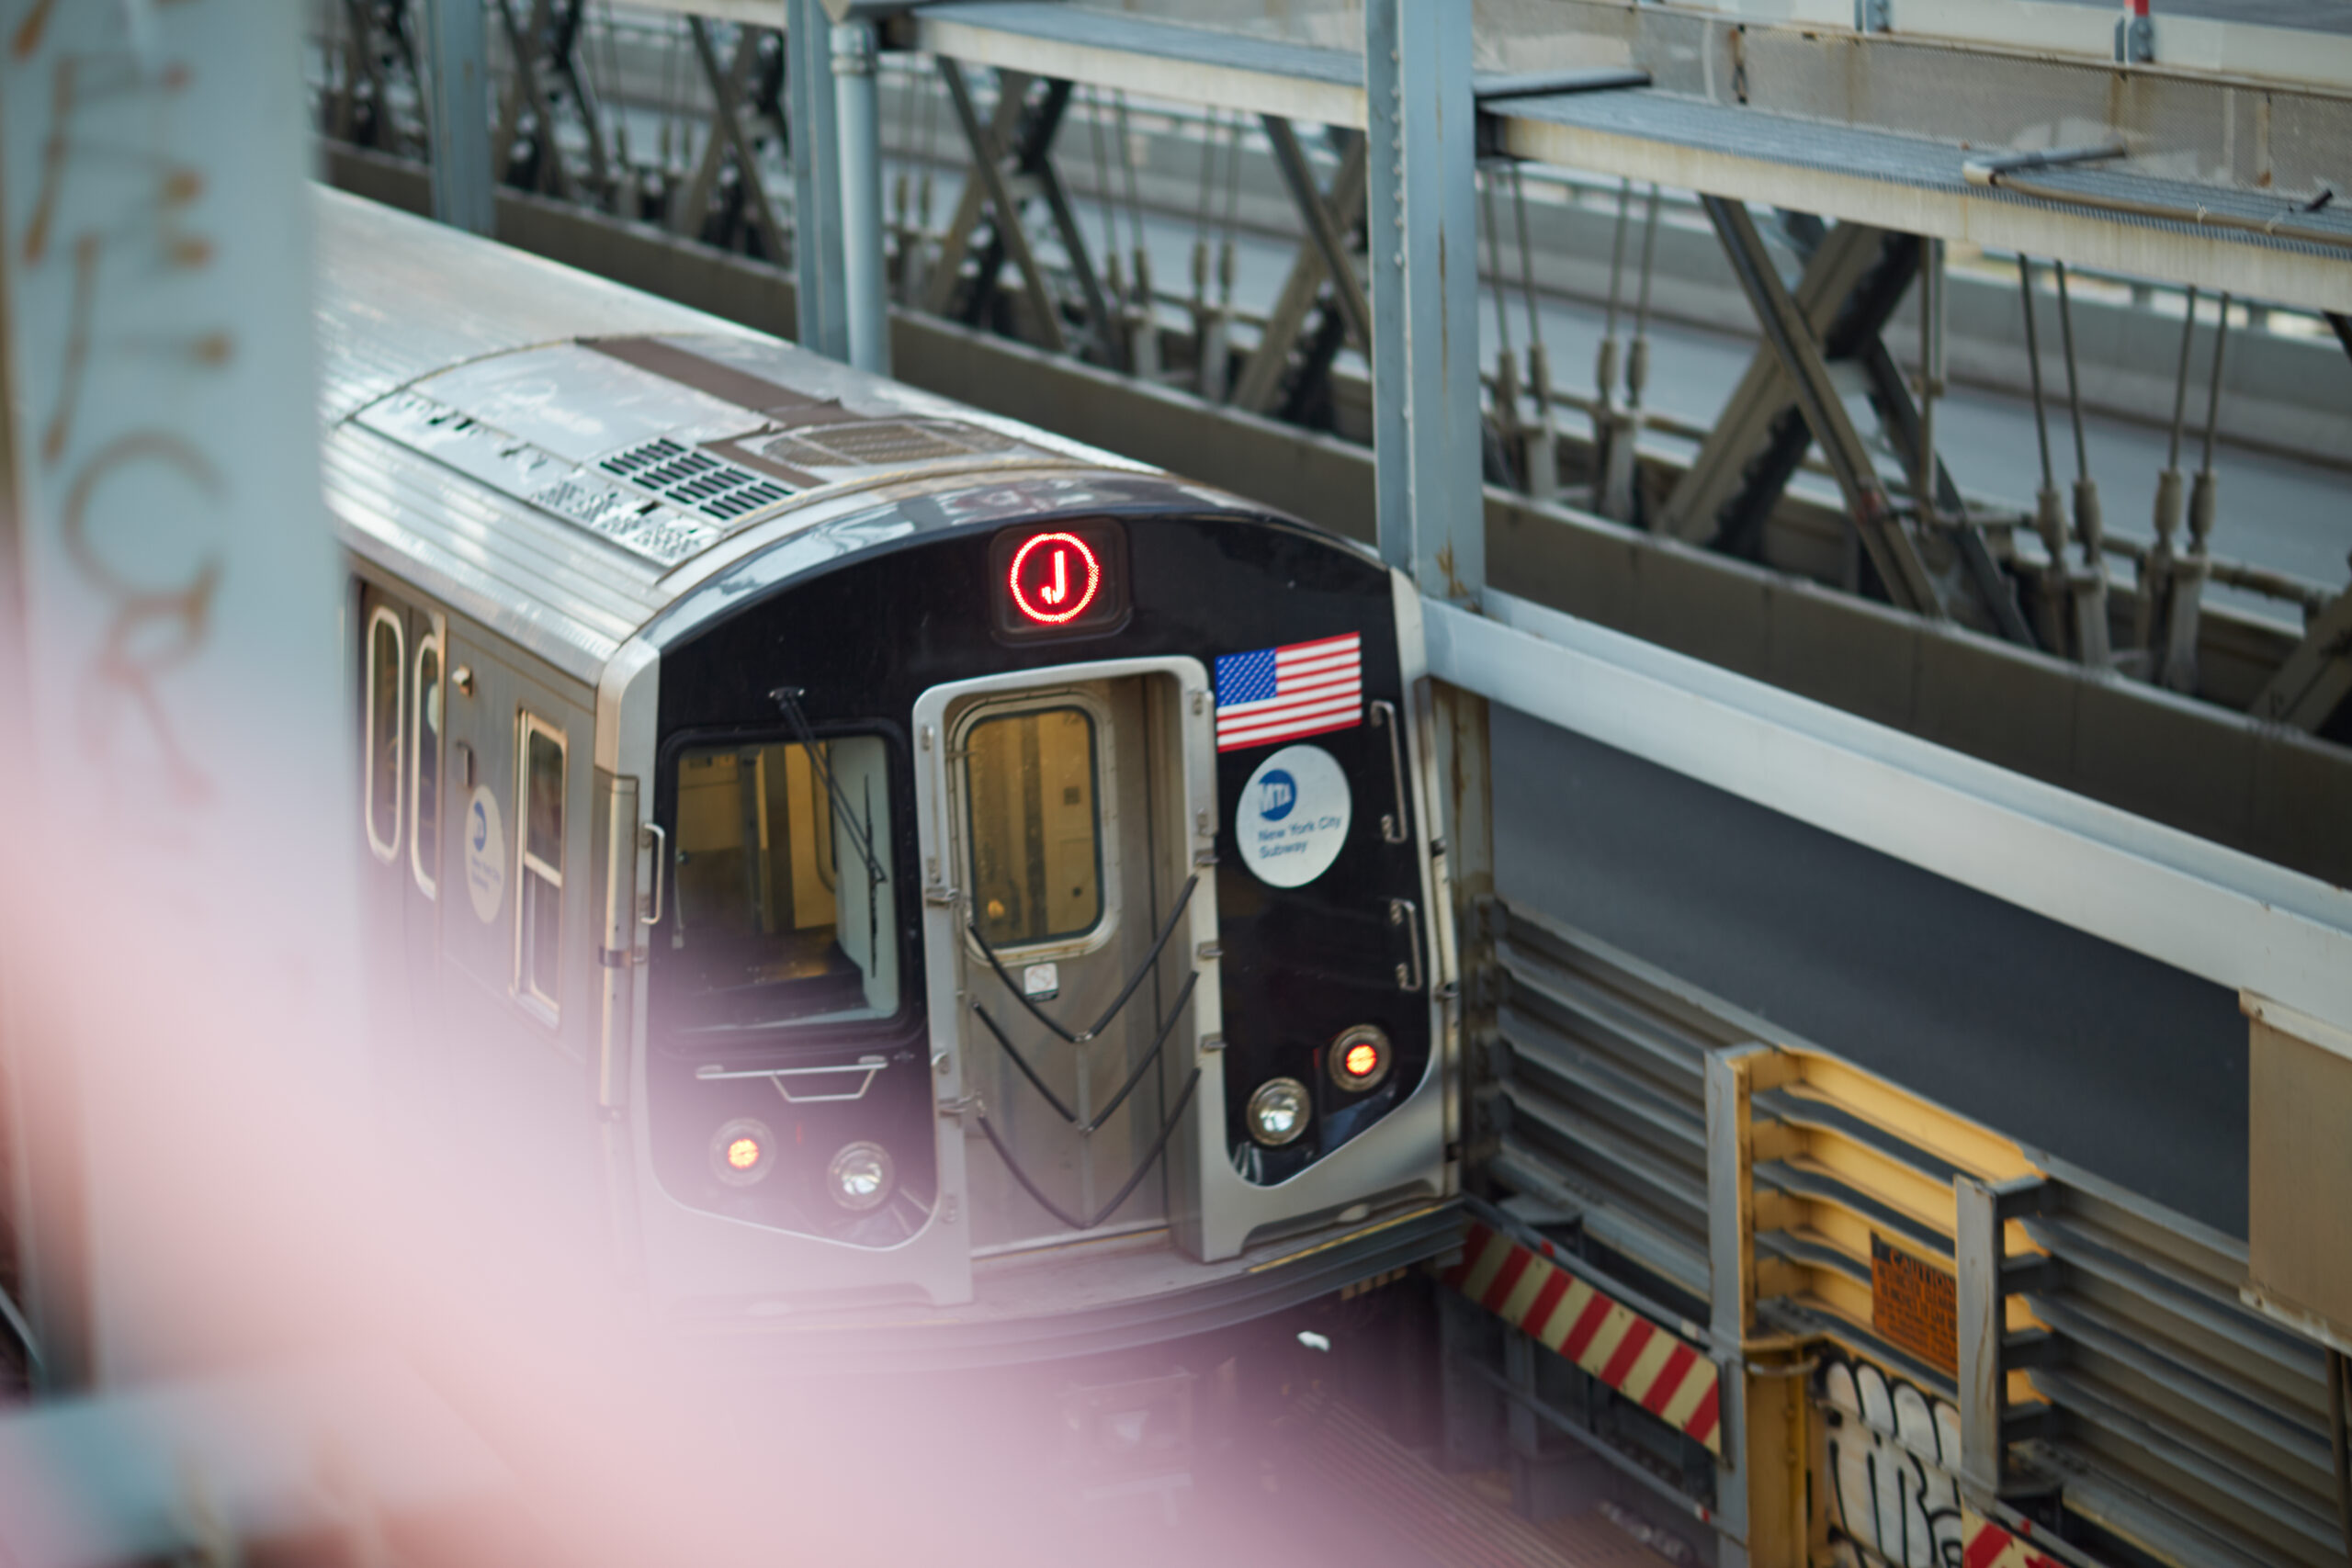 A subway car in motion on the tracks.